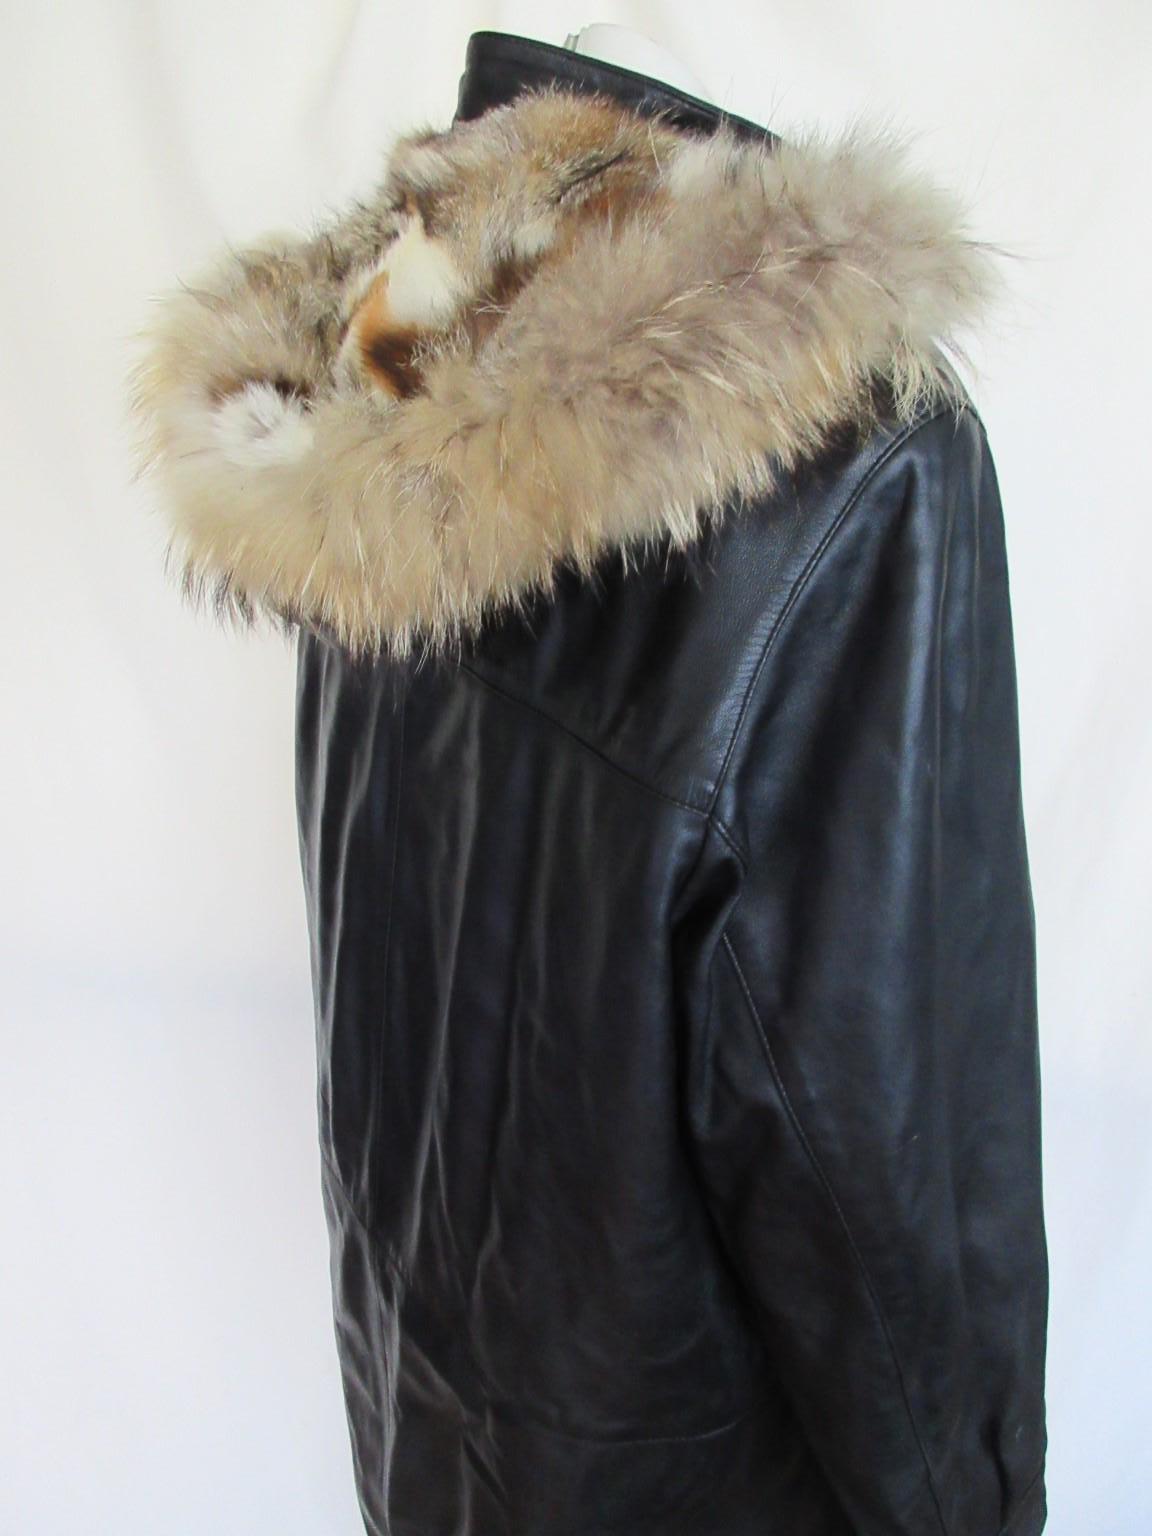 Black Leather Men Coat with Hood Fox Fur Lining For Sale 3